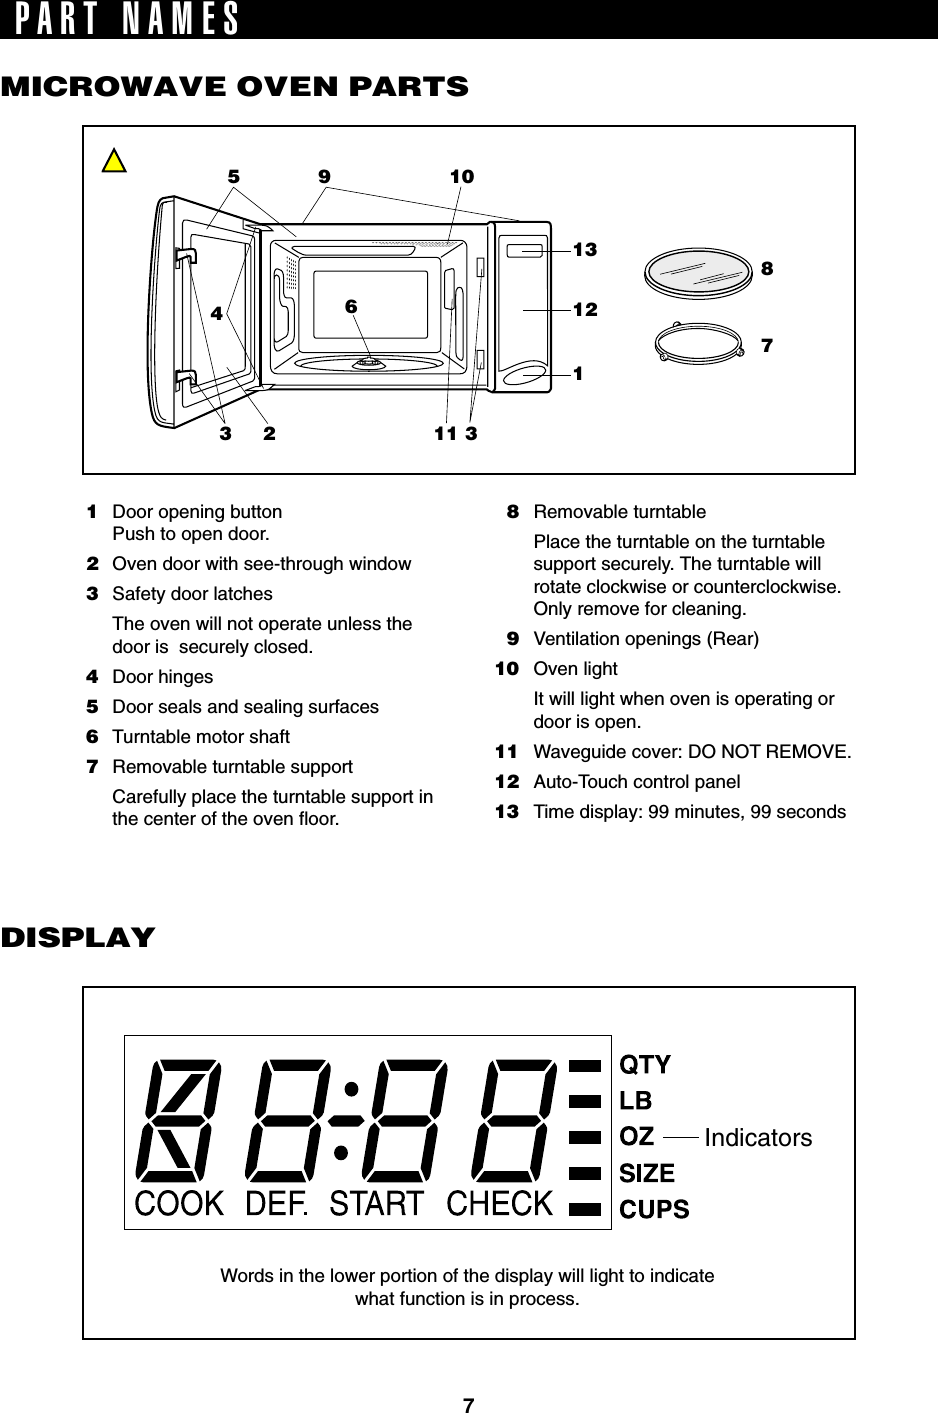 7IndicatorsPART NAMES1Door opening buttonPush to open door.2Oven door with see-through window3Safety door latchesThe oven will not operate unless thedoor is  securely closed.4Door hinges5Door seals and sealing surfaces6Turntable motor shaft7Removable turntable supportCarefully place the turntable support inthe center of the oven floor.8Removable turntablePlace the turntable on the turntablesupport securely. The turntable willrotate clockwise or counterclockwise.Only remove for cleaning.9Ventilation openings (Rear)10 Oven lightIt will light when oven is operating ordoor is open.11 Waveguide cover: DO NOT REMOVE.12 Auto-Touch control panel13 Time display: 99 minutes, 99 secondsMICROWAVE OVEN PARTSDISPLAYWords in the lower portion of the display will light to indicatewhat function is in process.1213159 10324611 387